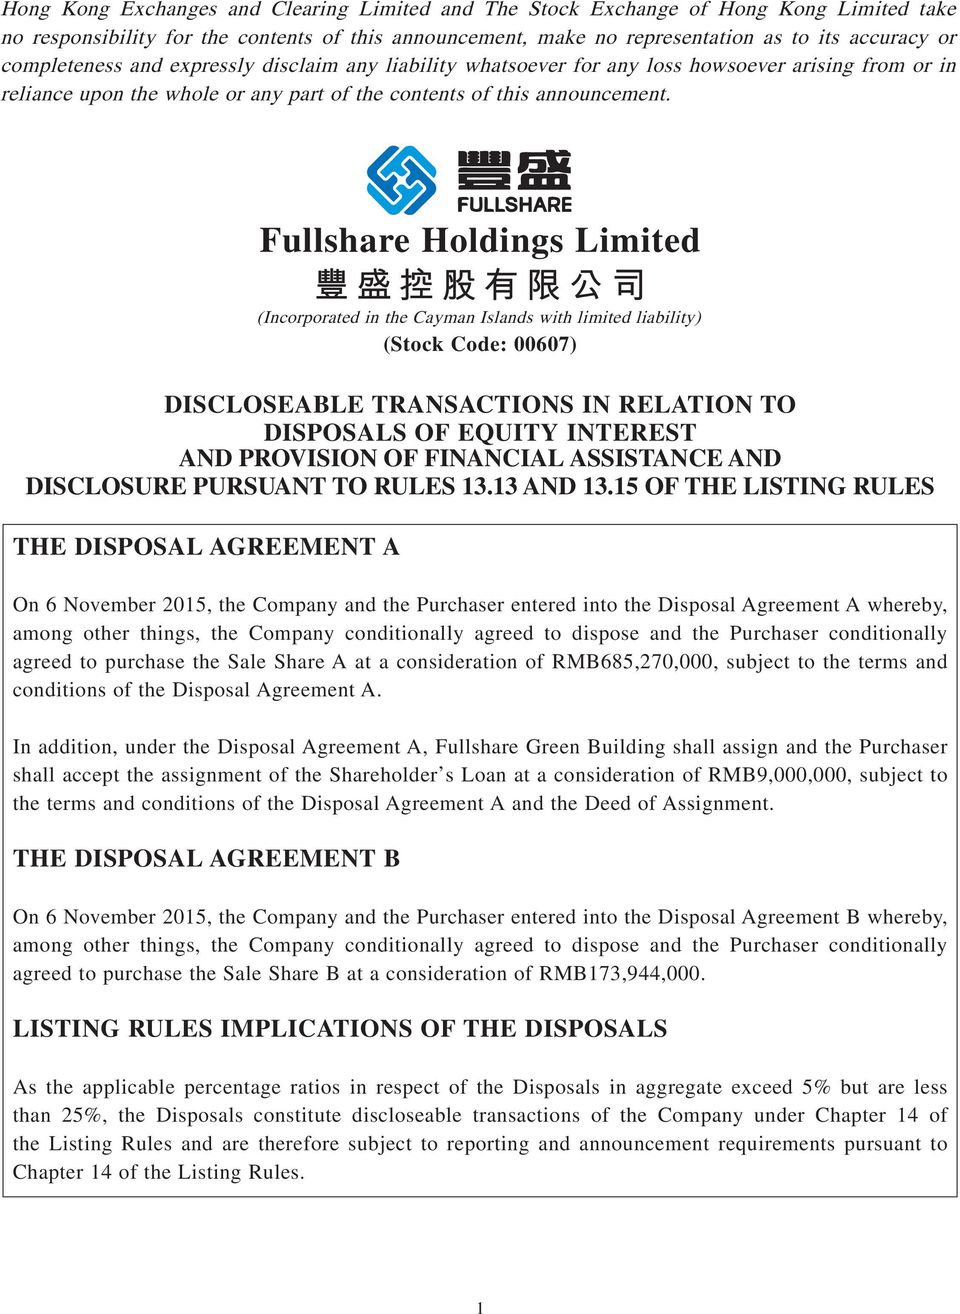 Fullshare Holdings Limited (Incorporated in the Cayman Islands with limited liability) (Stock Code: 00607) DISCLOSEABLE TRANSACTIONS IN RELATION TO DISPOSALS OF EQUITY INTEREST AND PROVISION OF